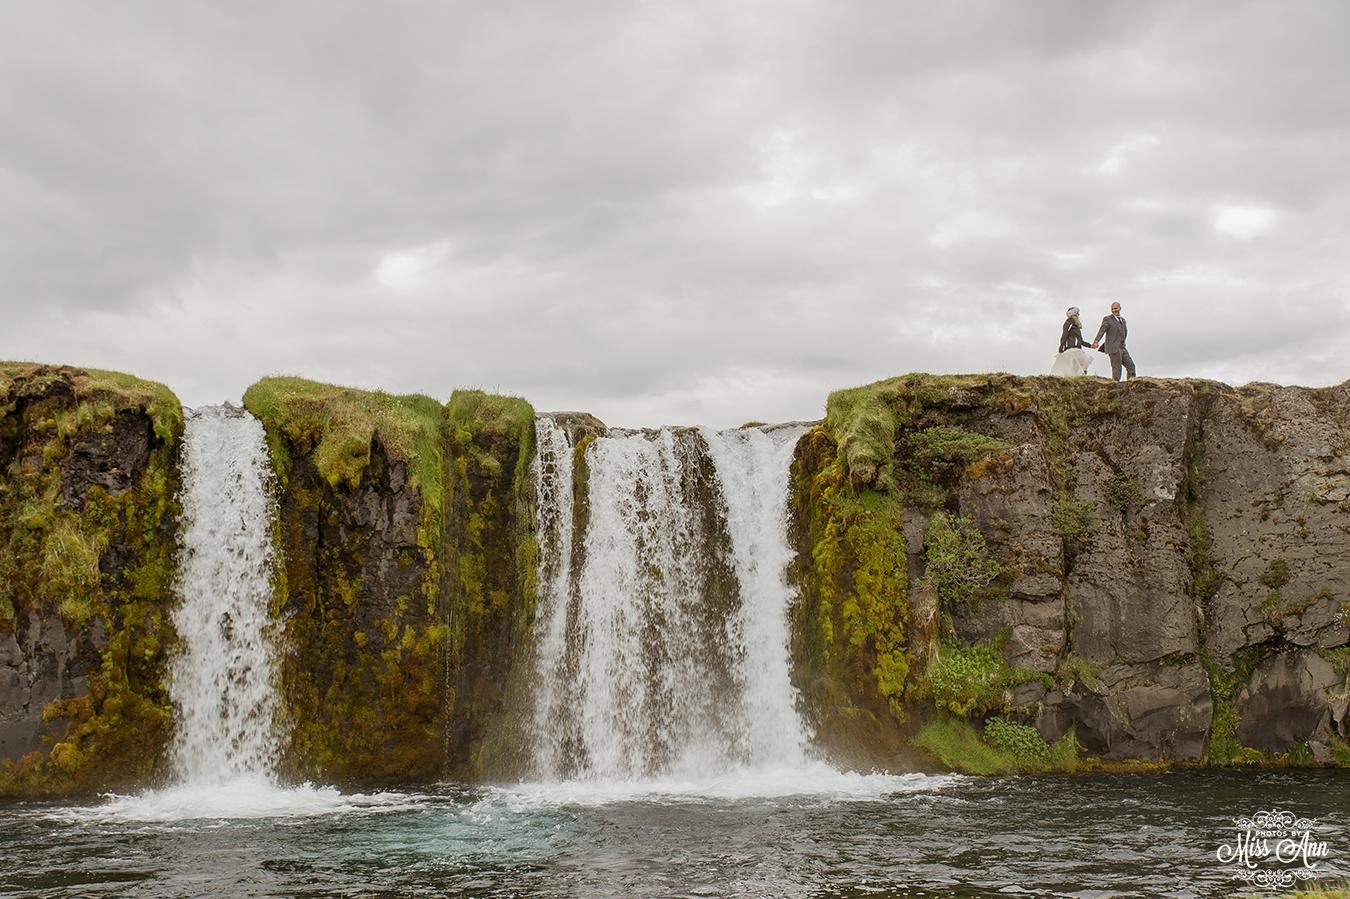 Waterfall Wedding in Iceland - Photos by Miss Ann